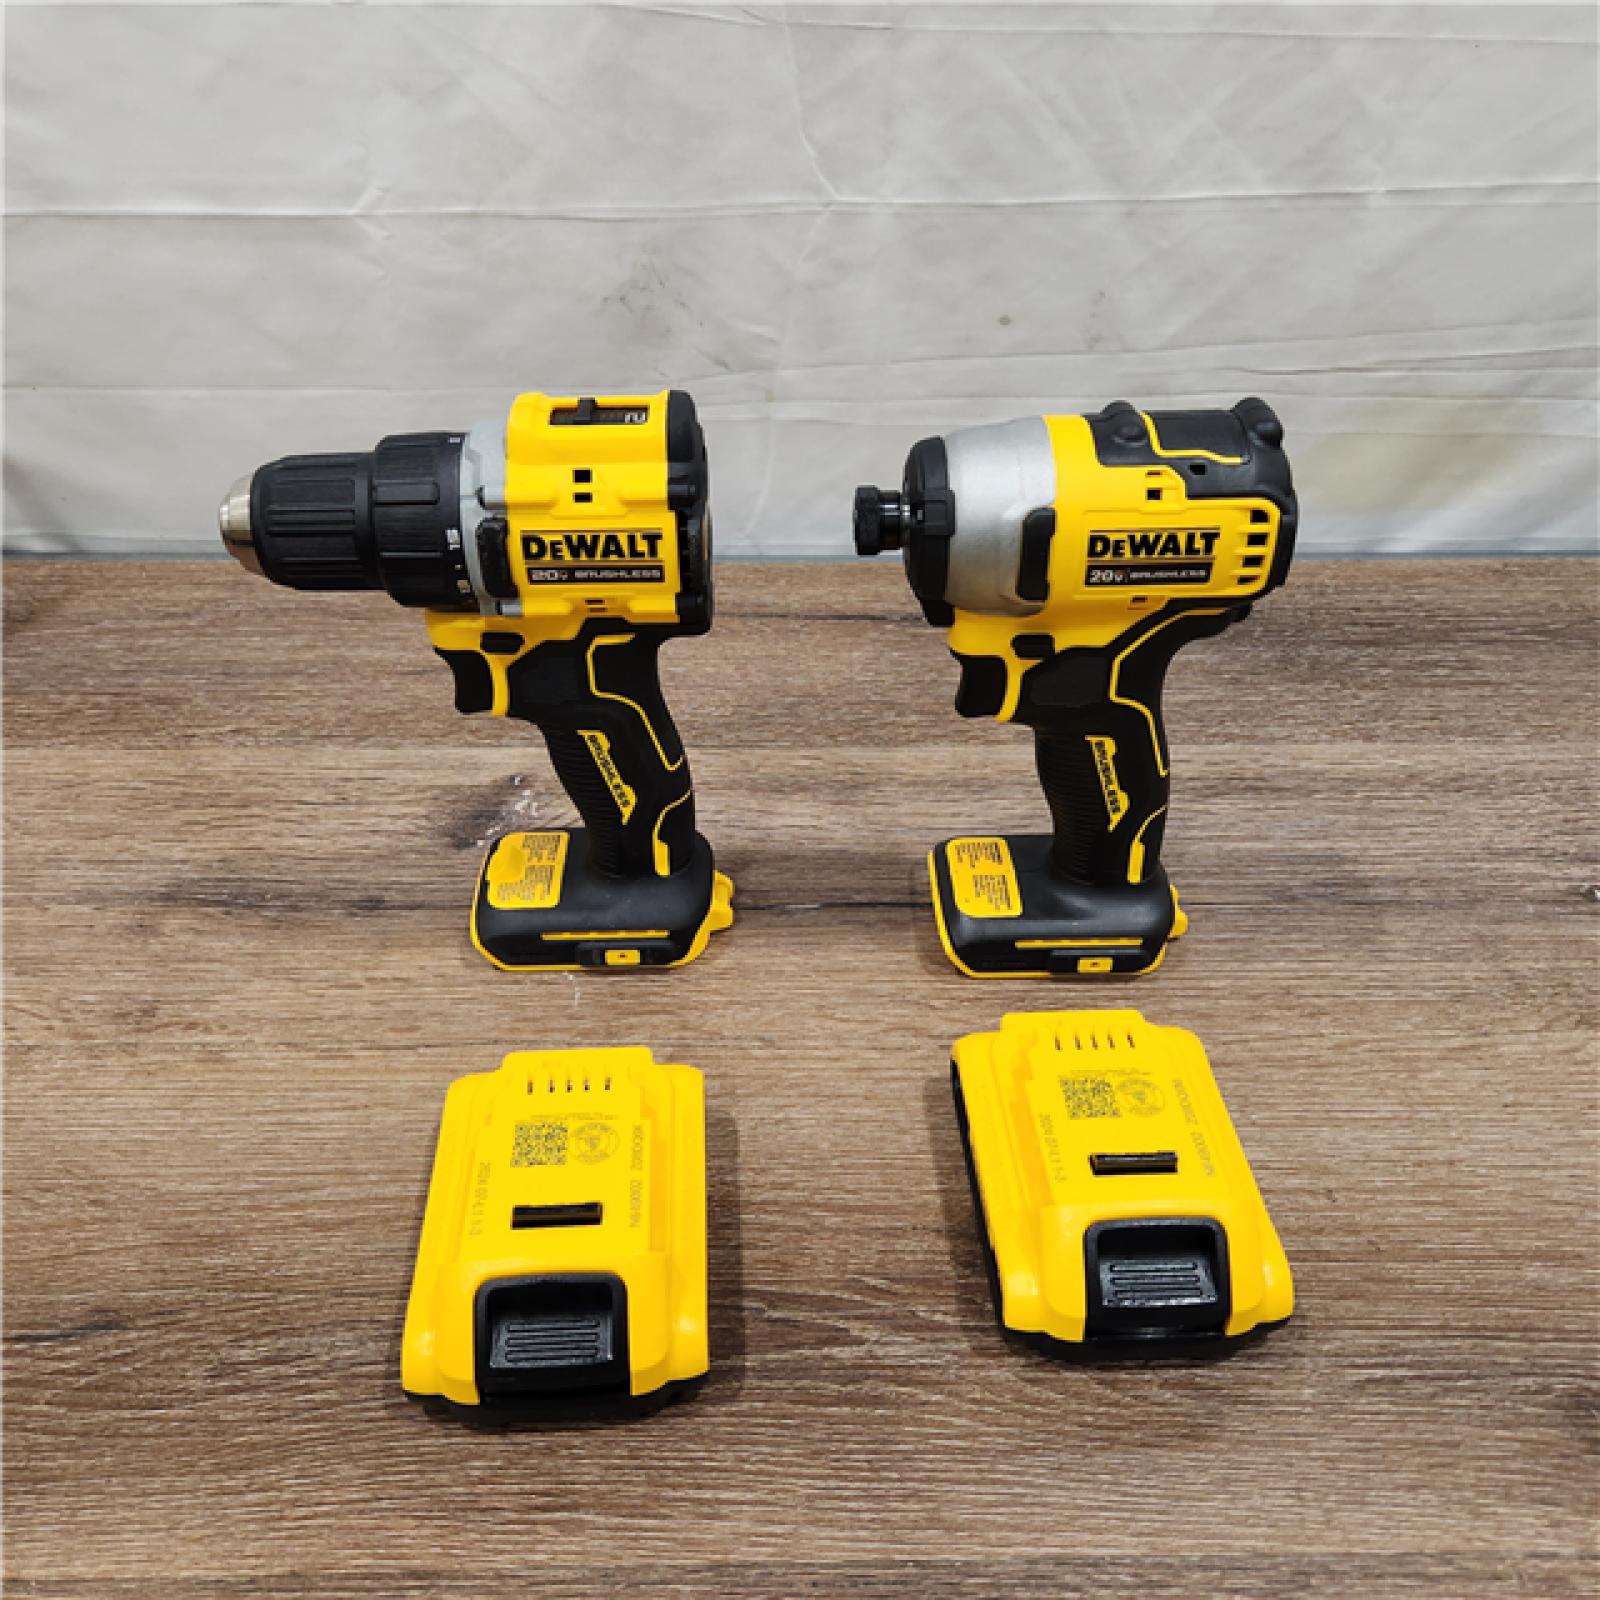 AS-IS 121356 20V Compact Drill & Impact Driver Kit